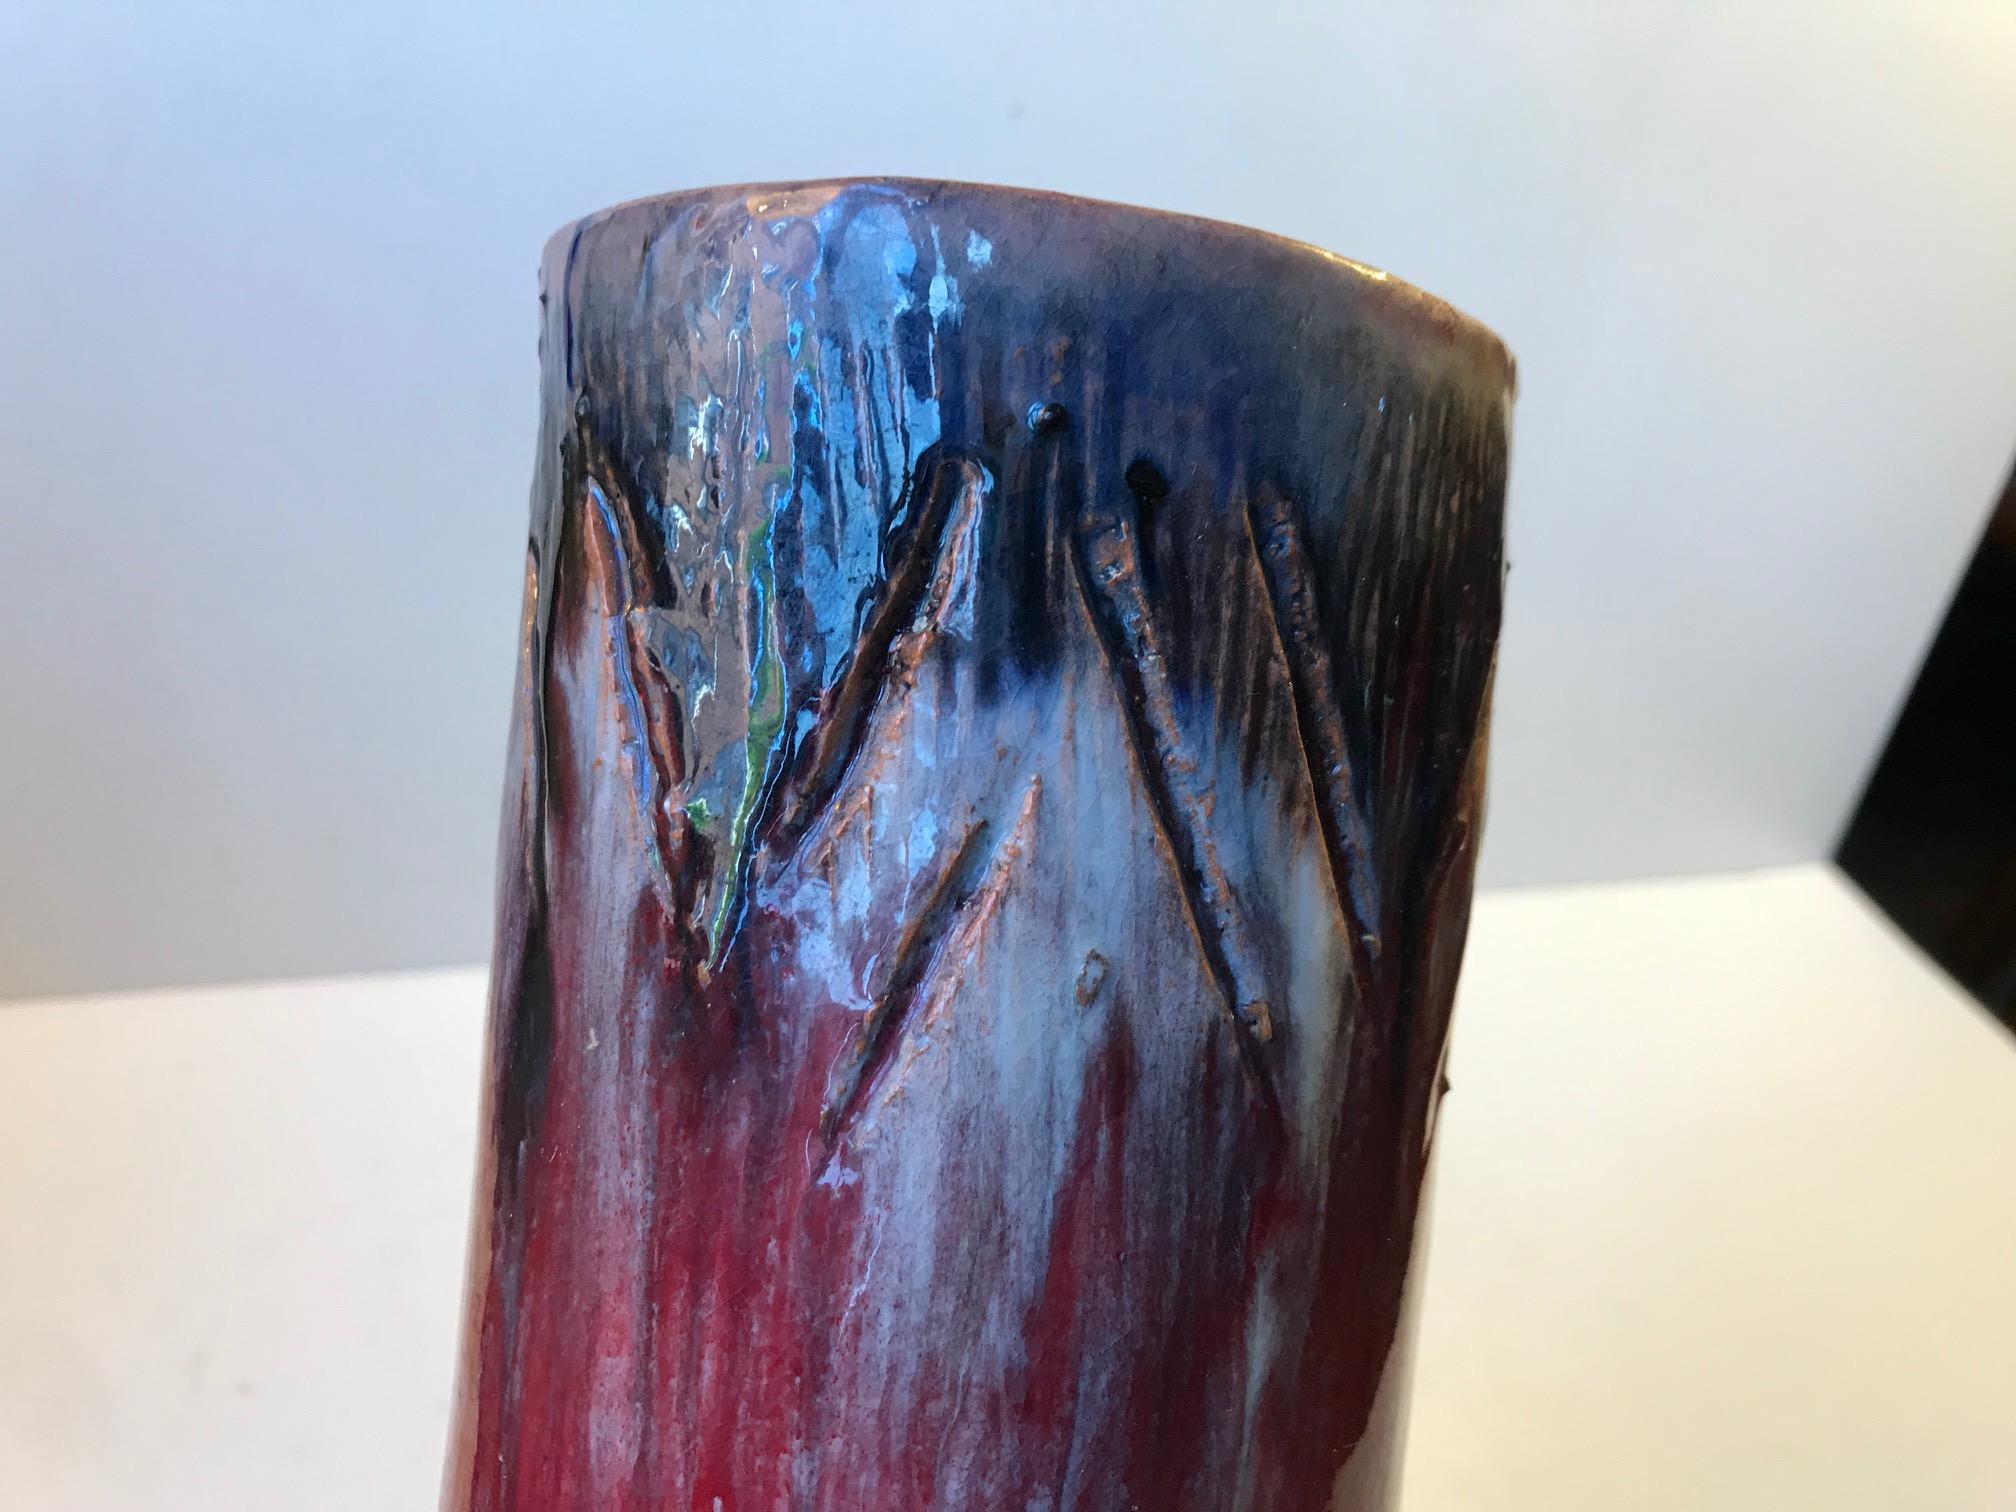 Unique Danish Cylindrical Ceramic Vase in Oxblood and Drip Glaze, 1960s For Sale 2